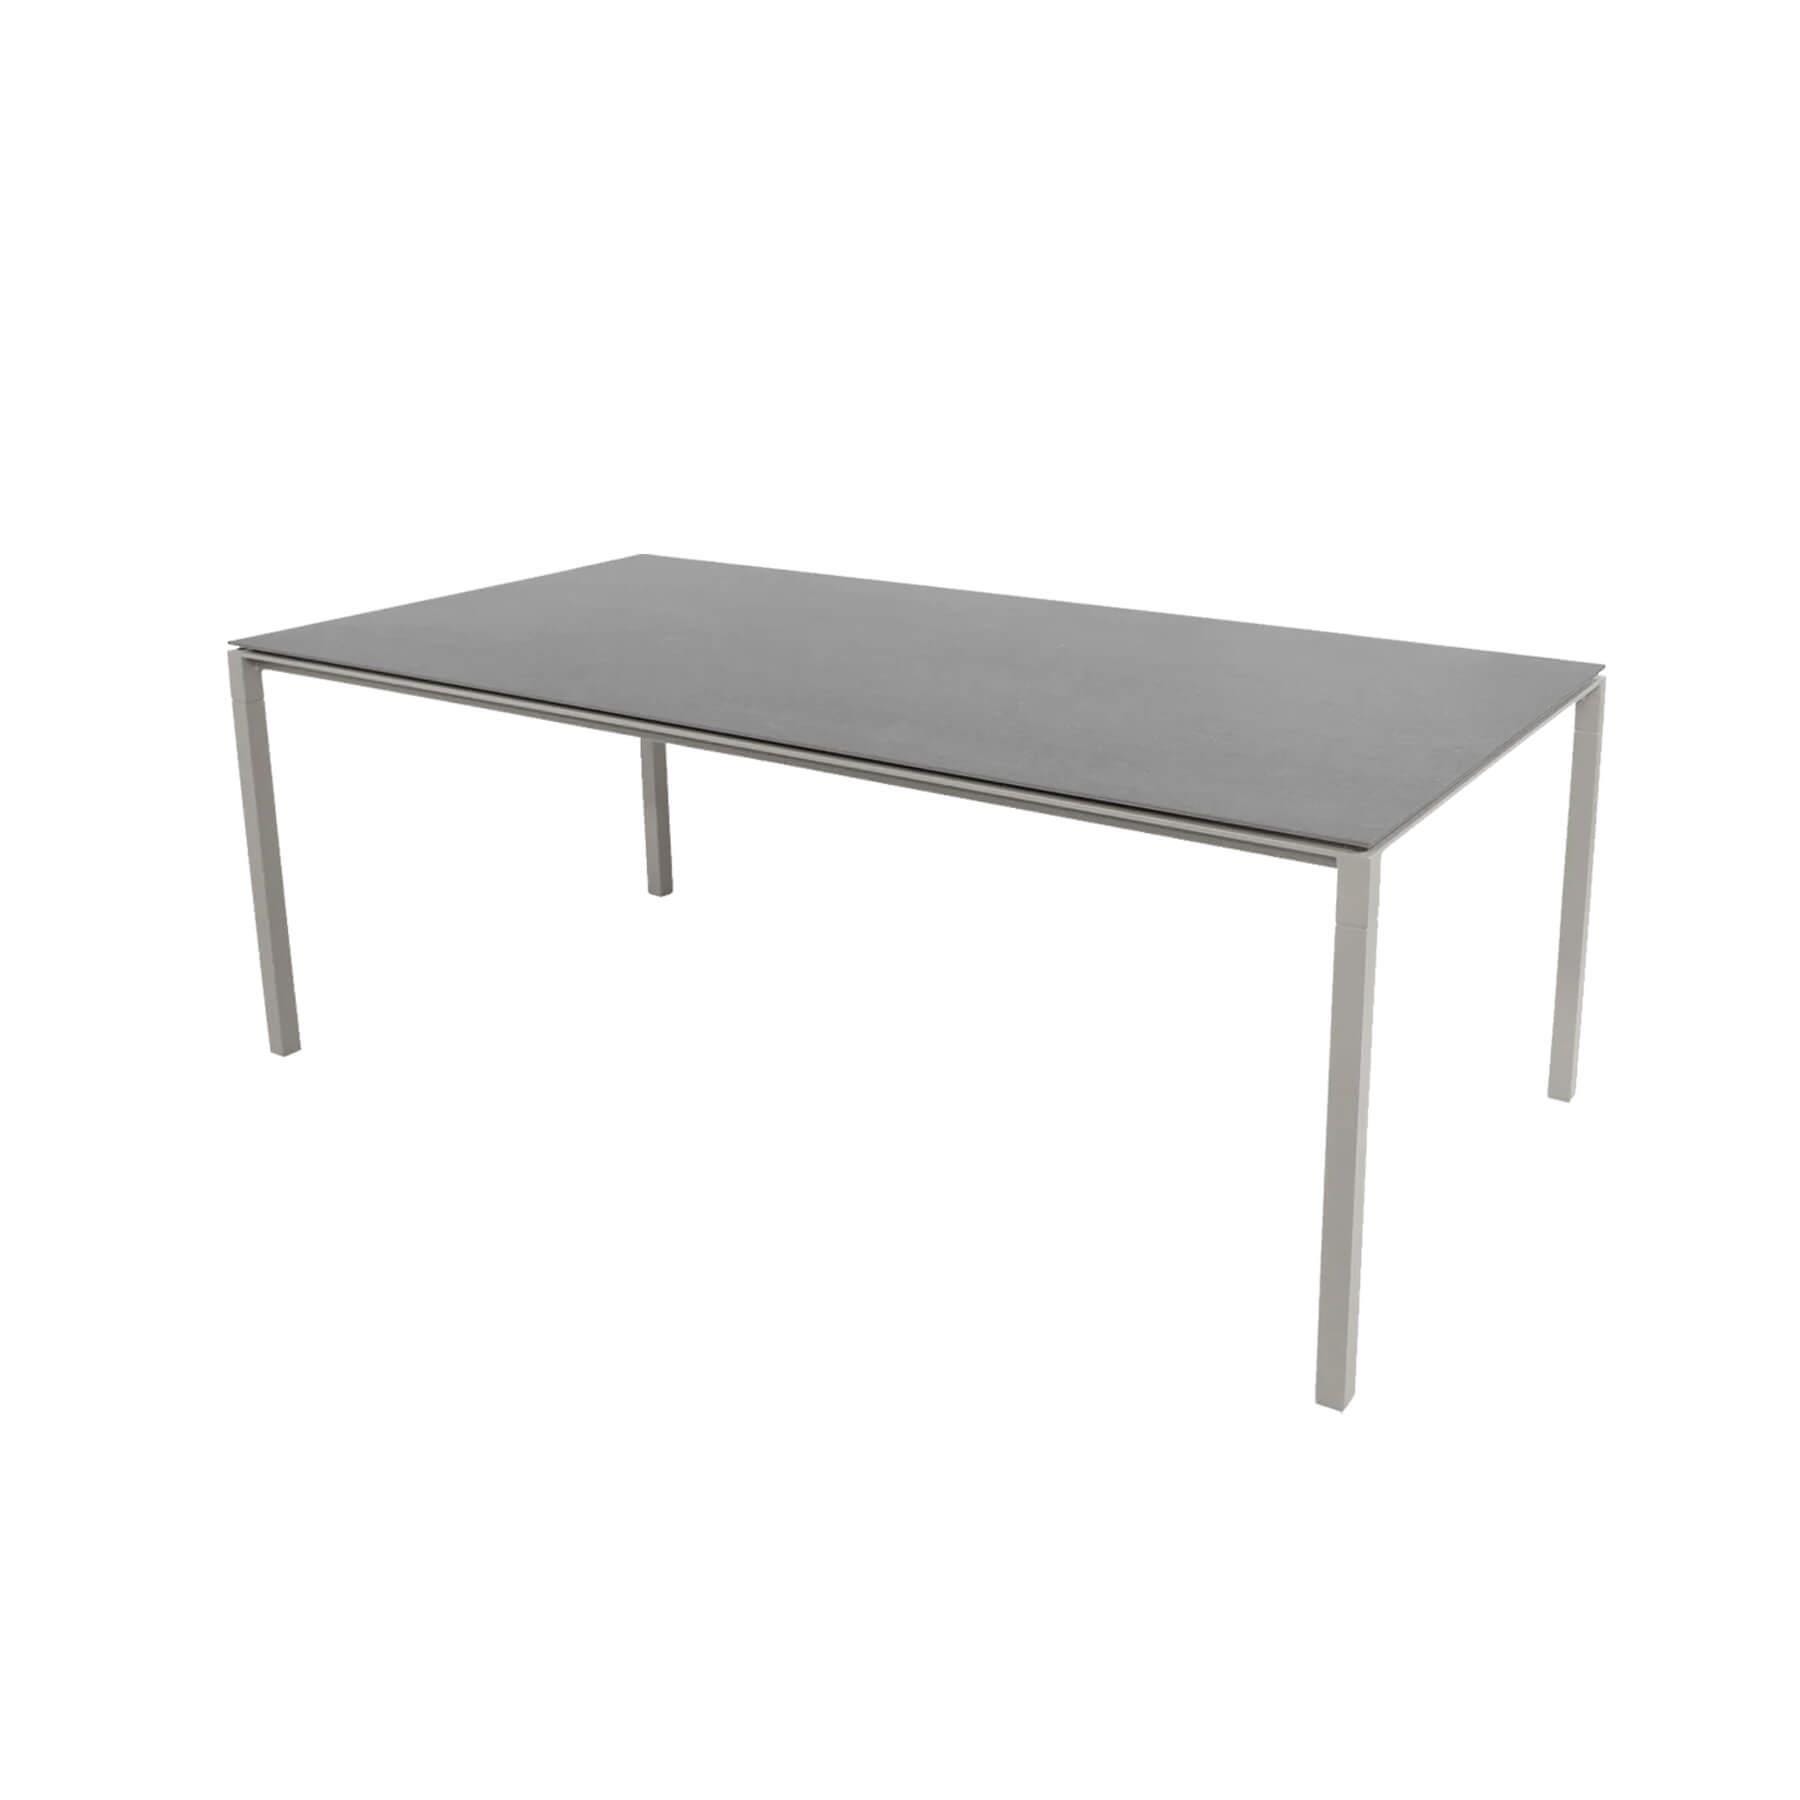 Caneline Pure Outdoor Dining Table Large Ceramic Basalt Top Taupe Legs Grey